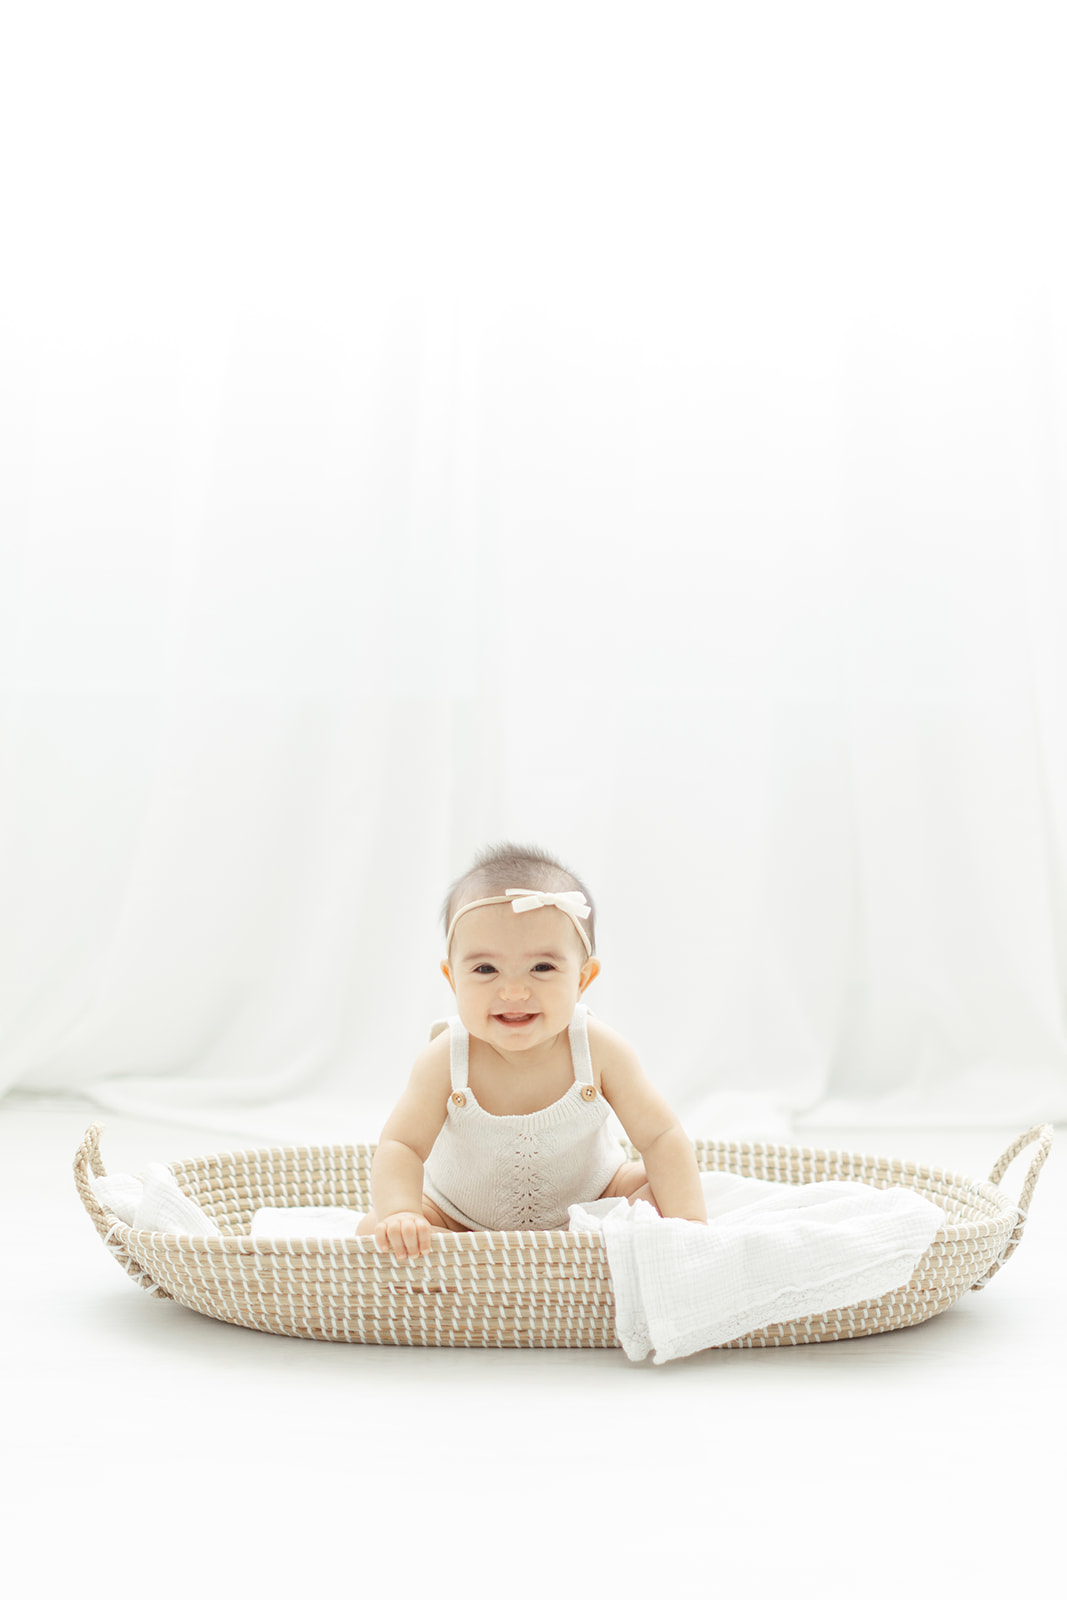 A toddler girl plays in a shallow woven basket under a window in a studio